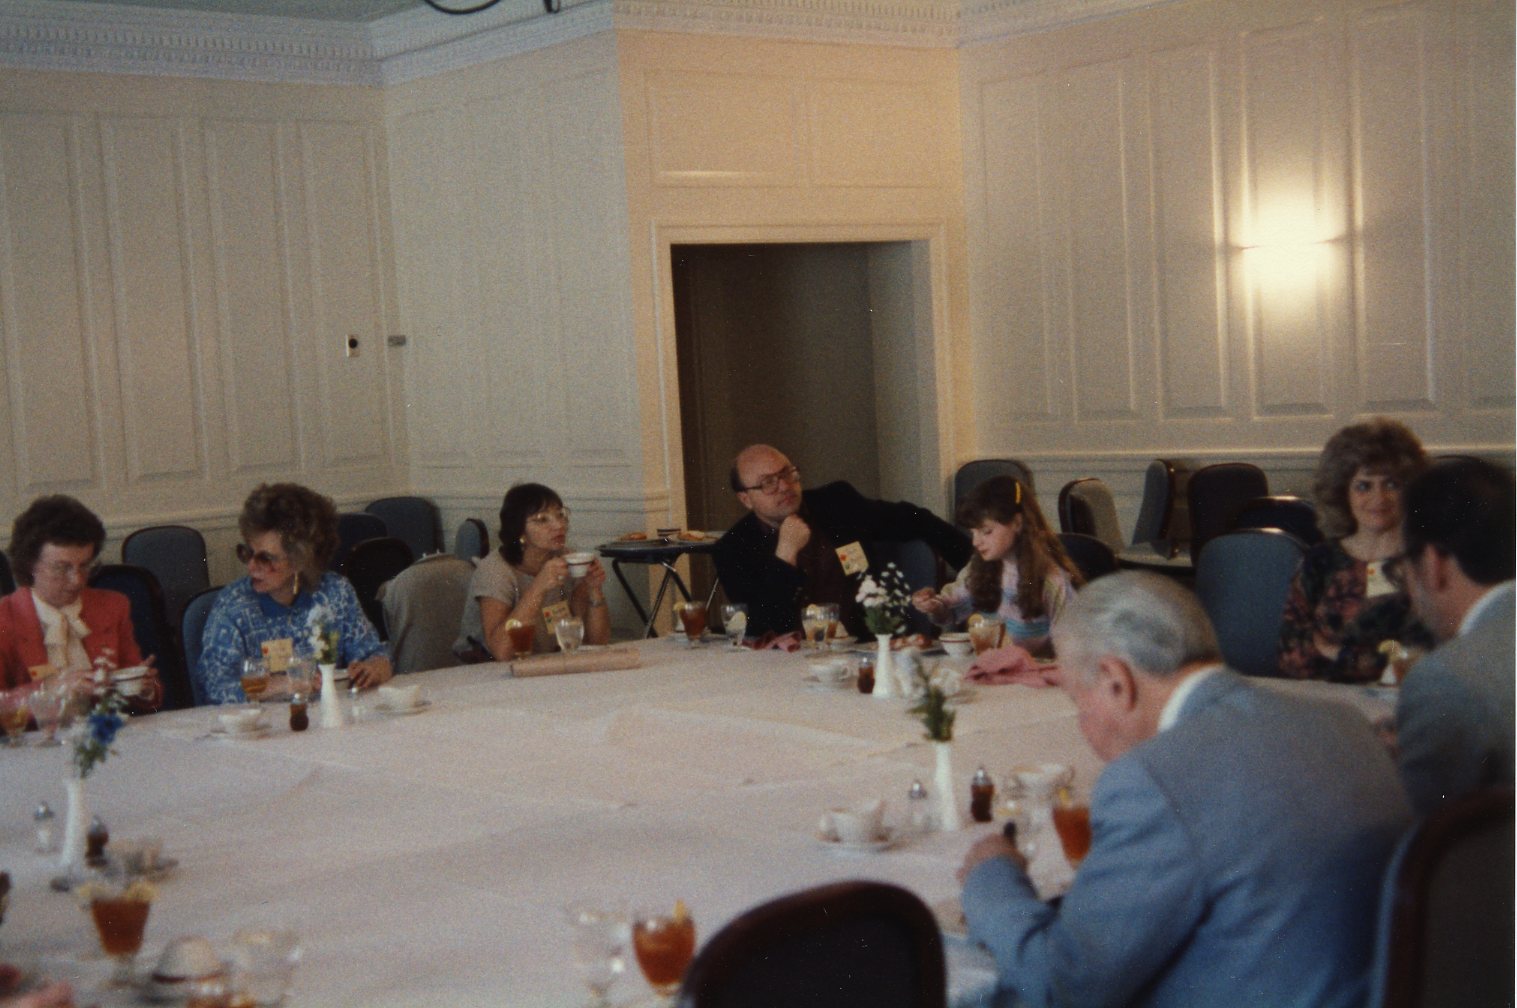 1989 dinner at a large table